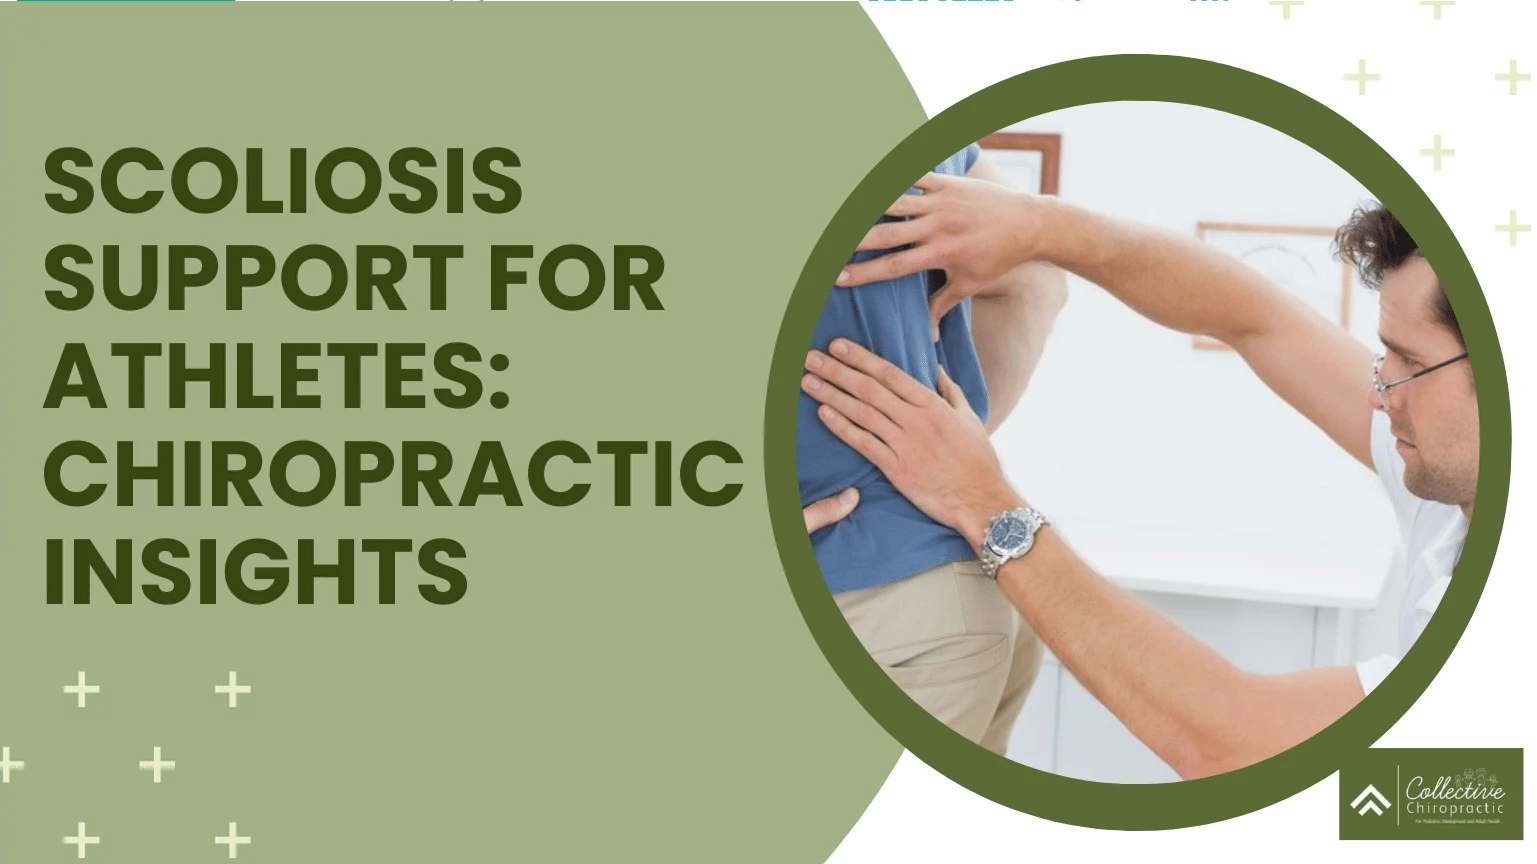 Scoliosis Support for Athletes Chiropractic Insights